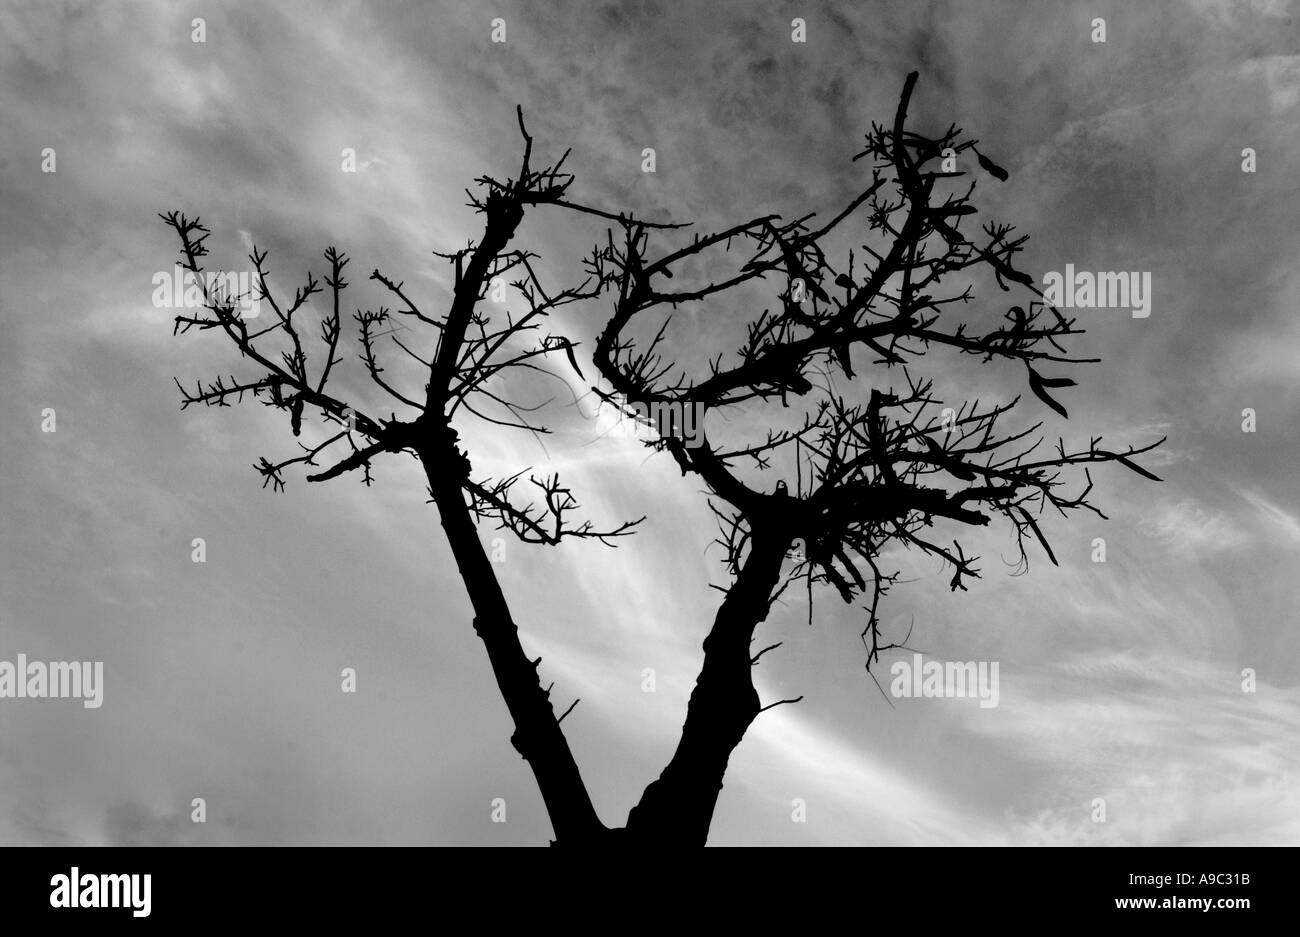 Black and white horizontal abstract image of dead tree silhouetted against sky with clouds Stock Photo